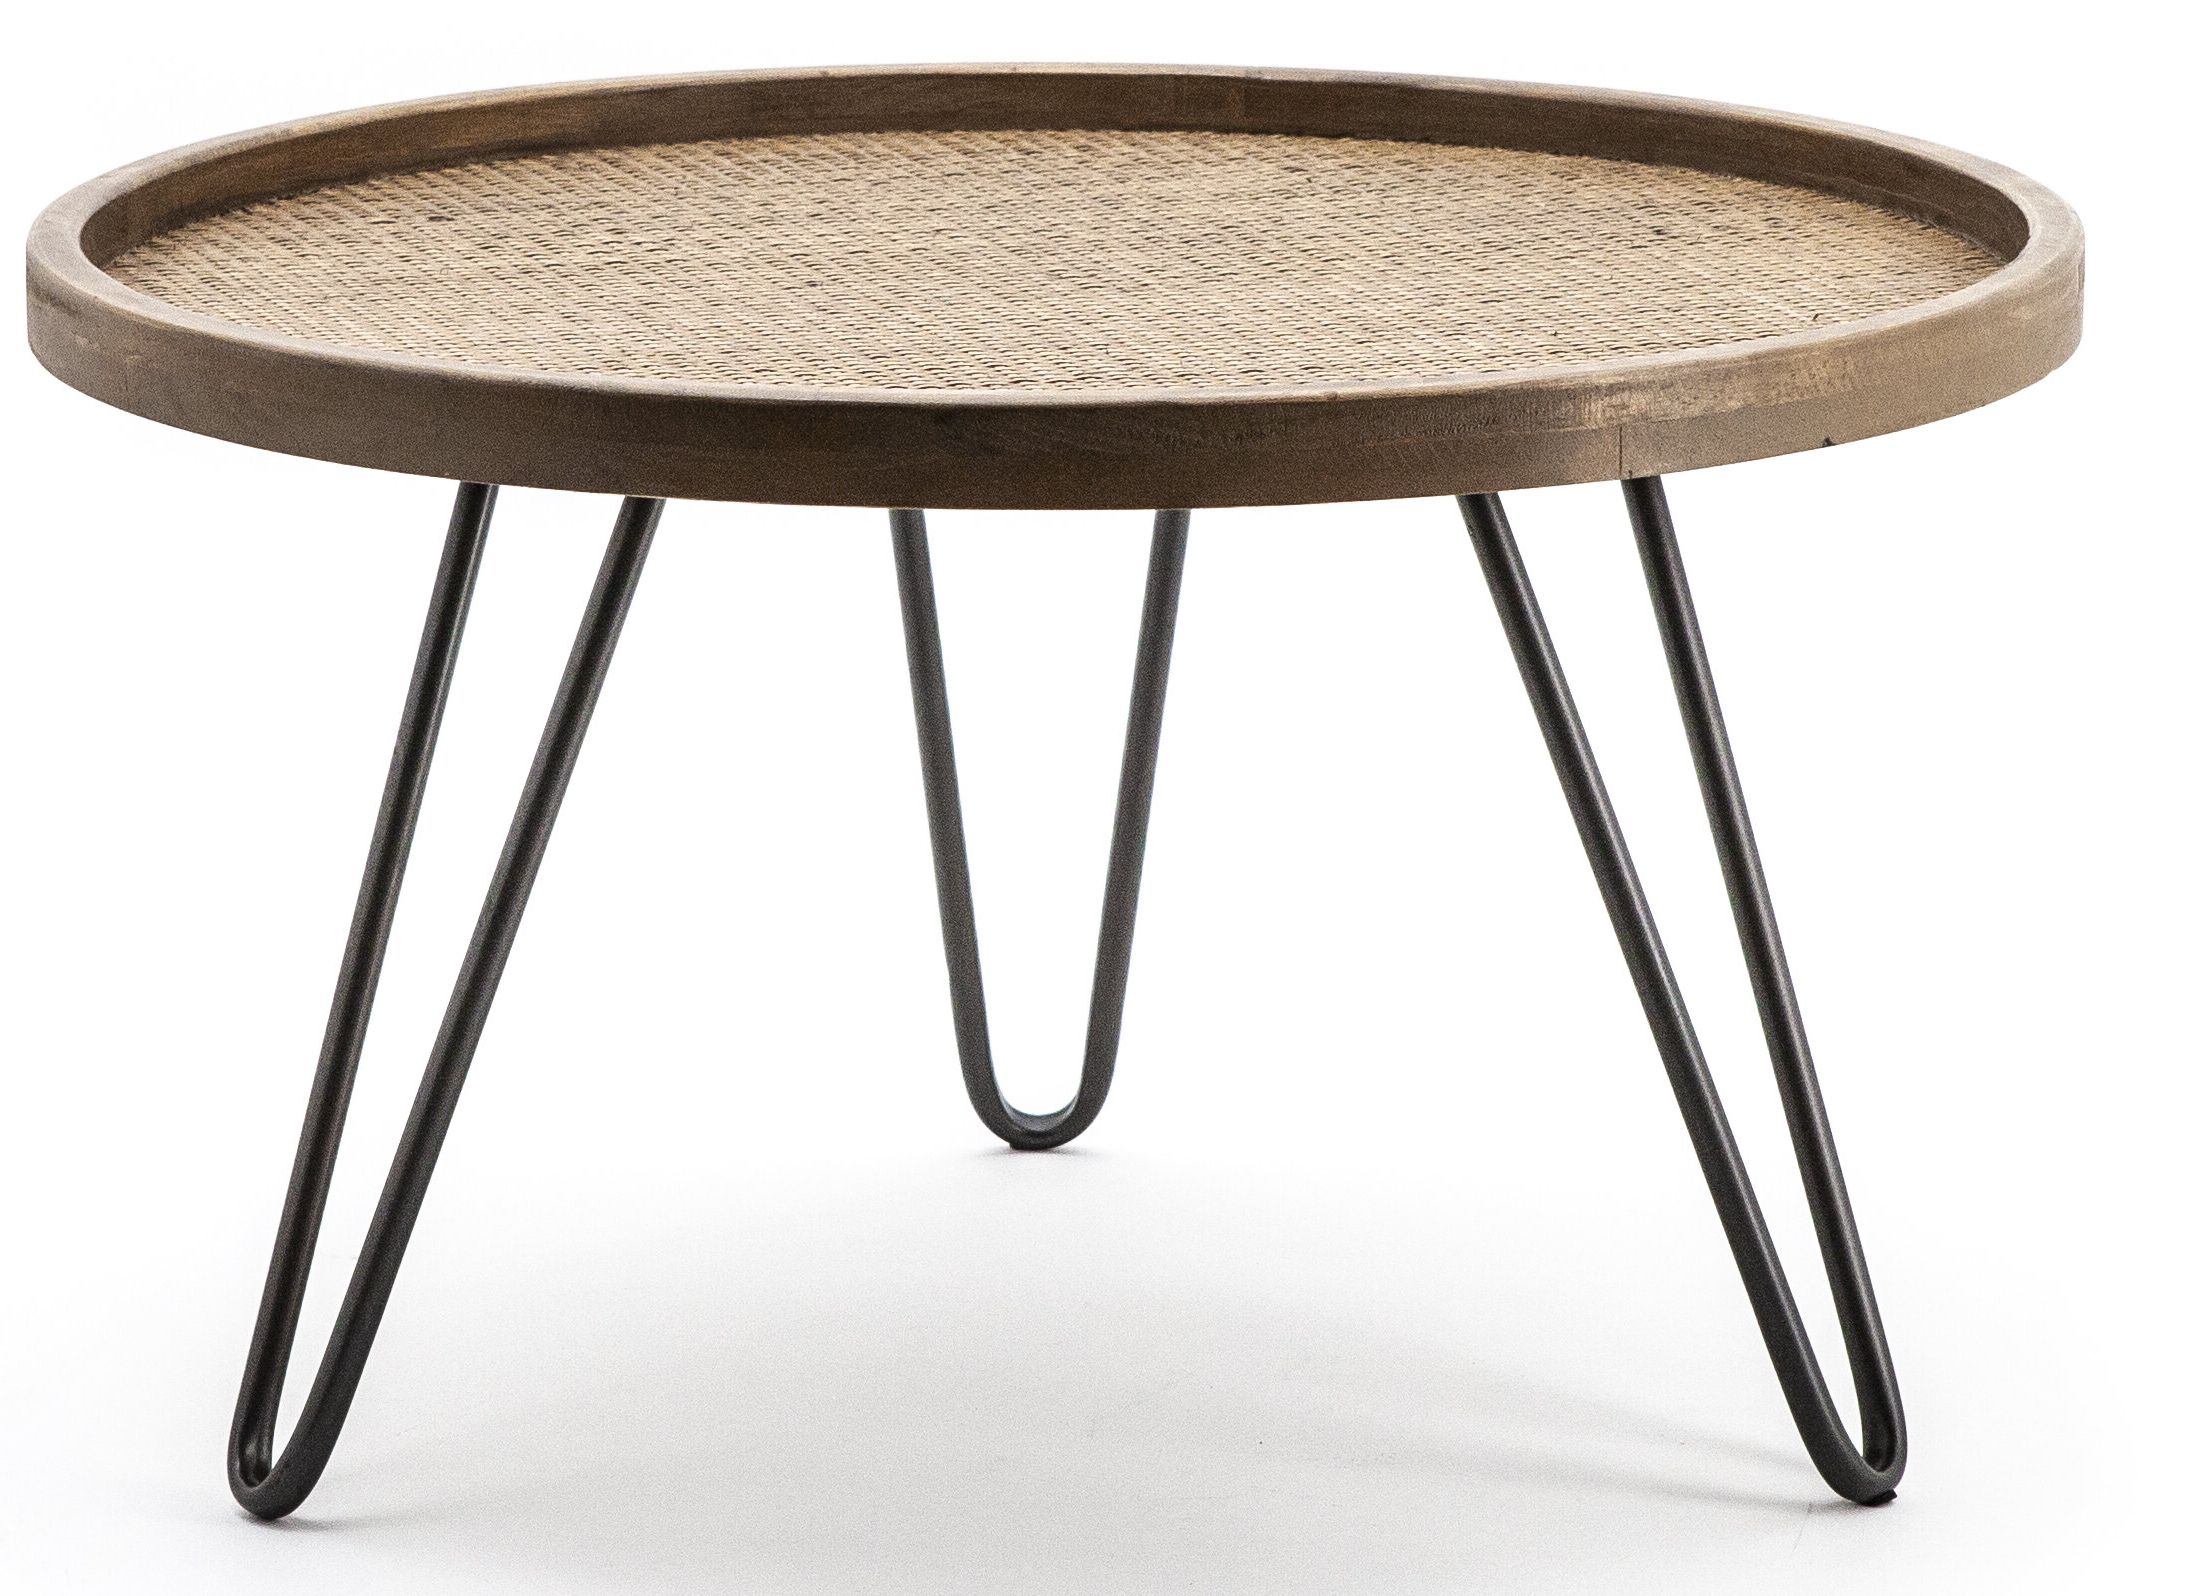 Perigold In 2019 3 Leg Outdoor Tables (View 9 of 15)